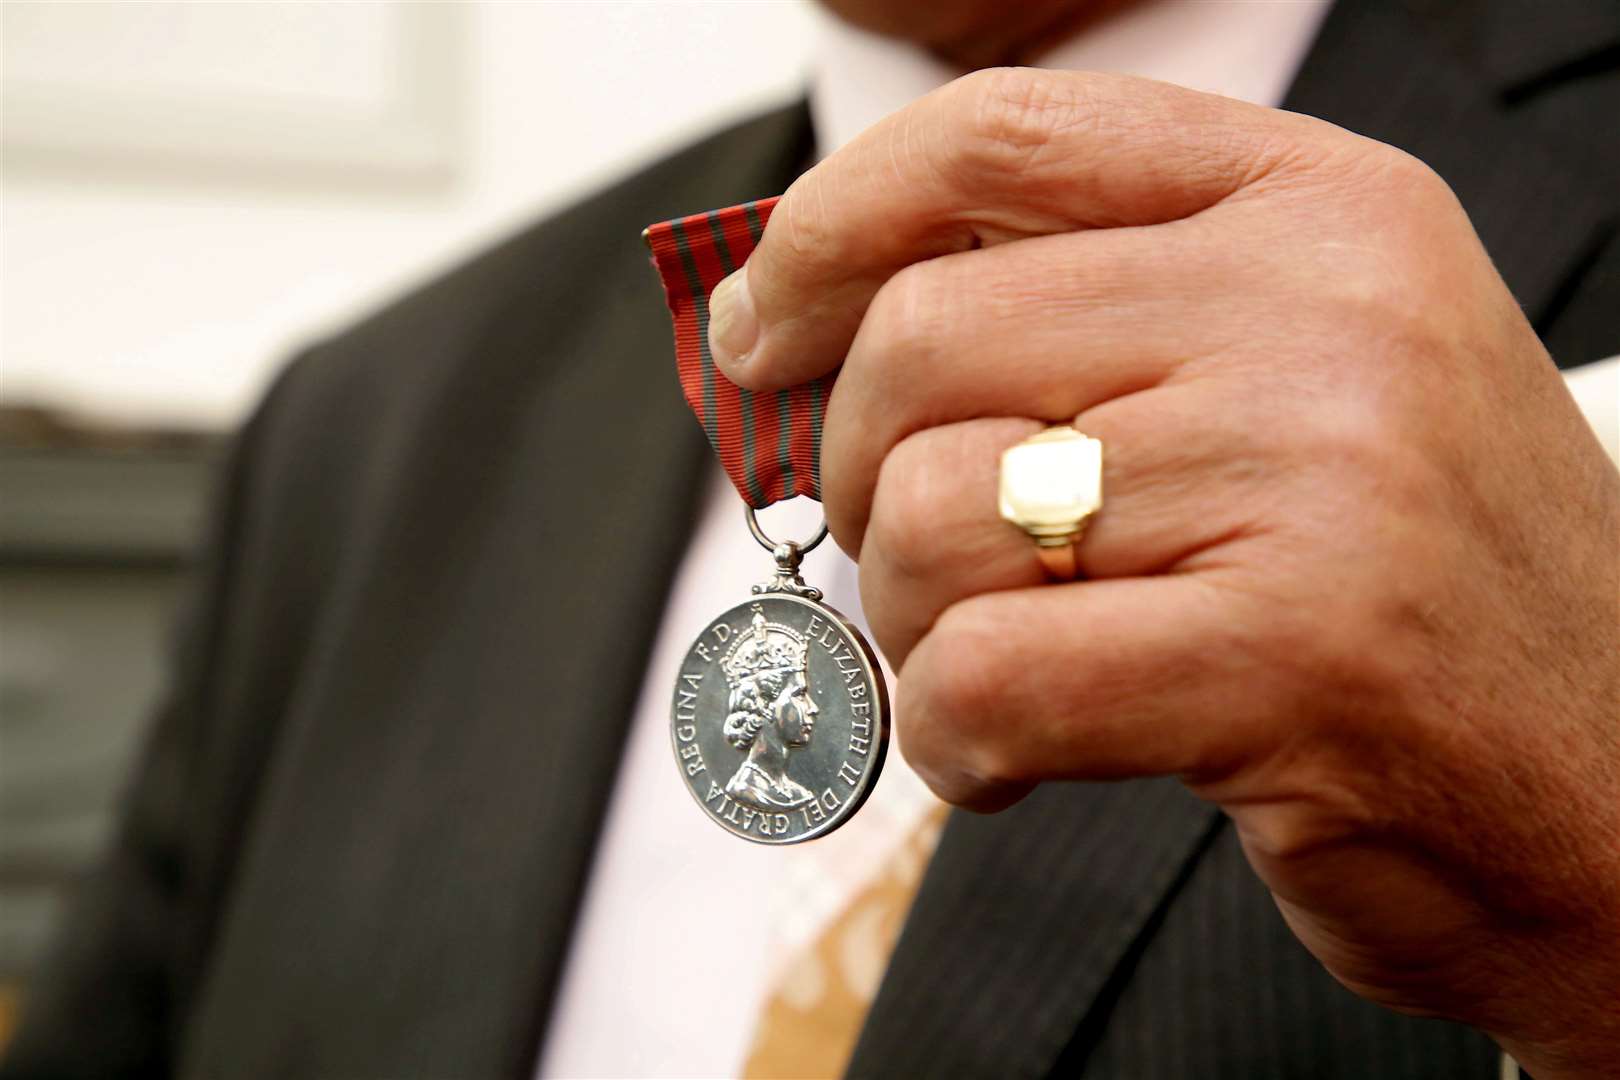 Ronnie sold his George medal for £50,000 at auction. Picture: SWNS